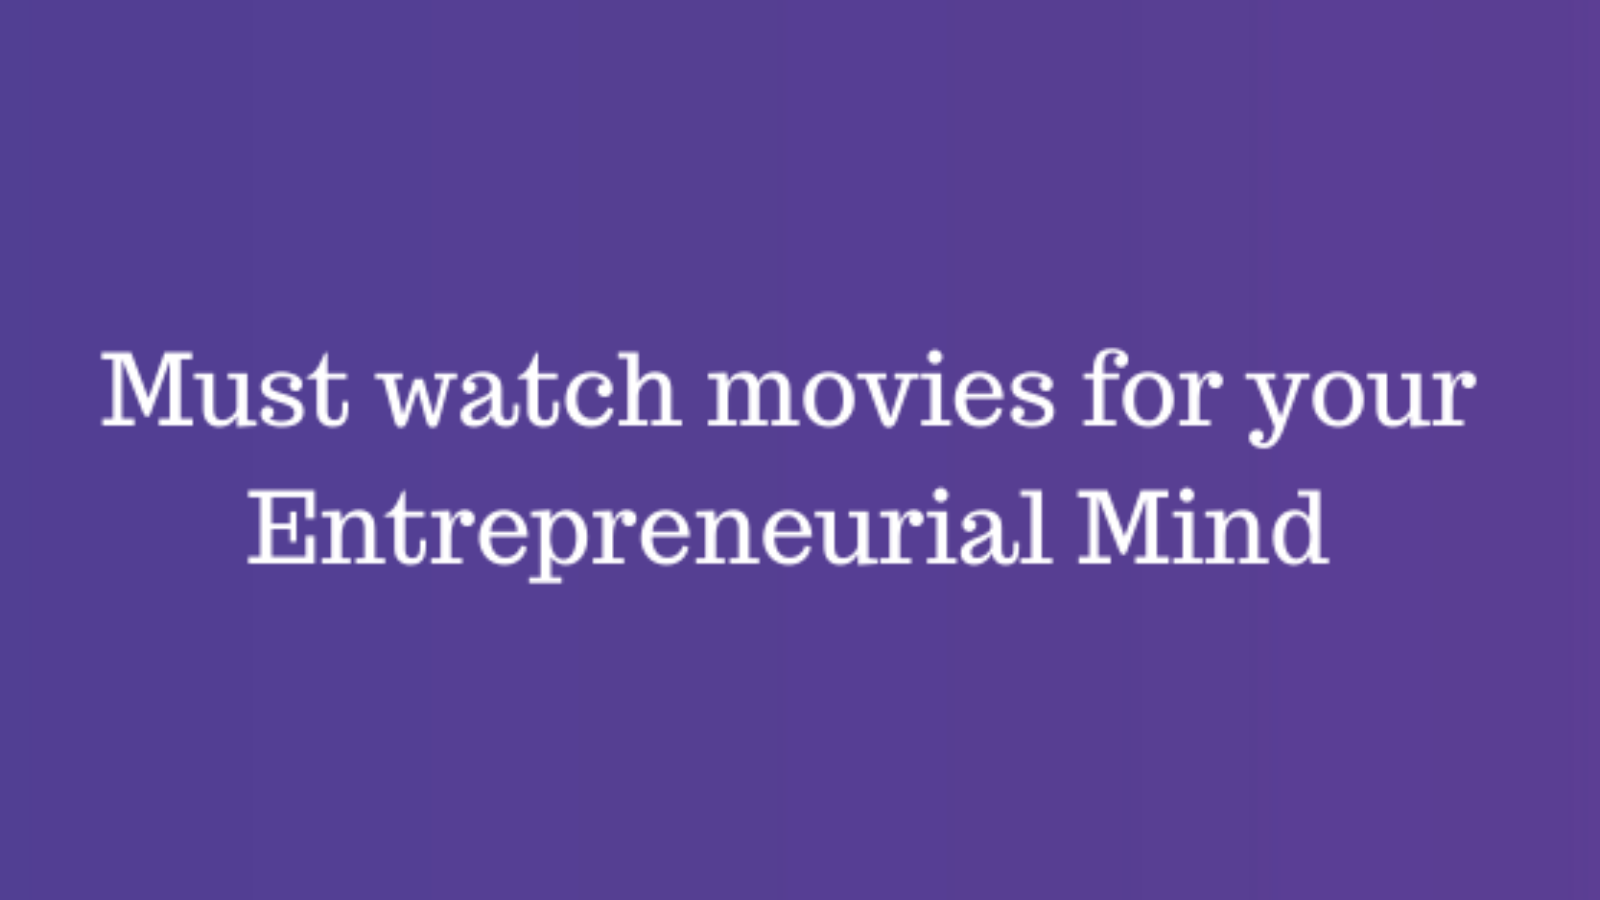 movies for Entrepreneurial Mind - By Egniol